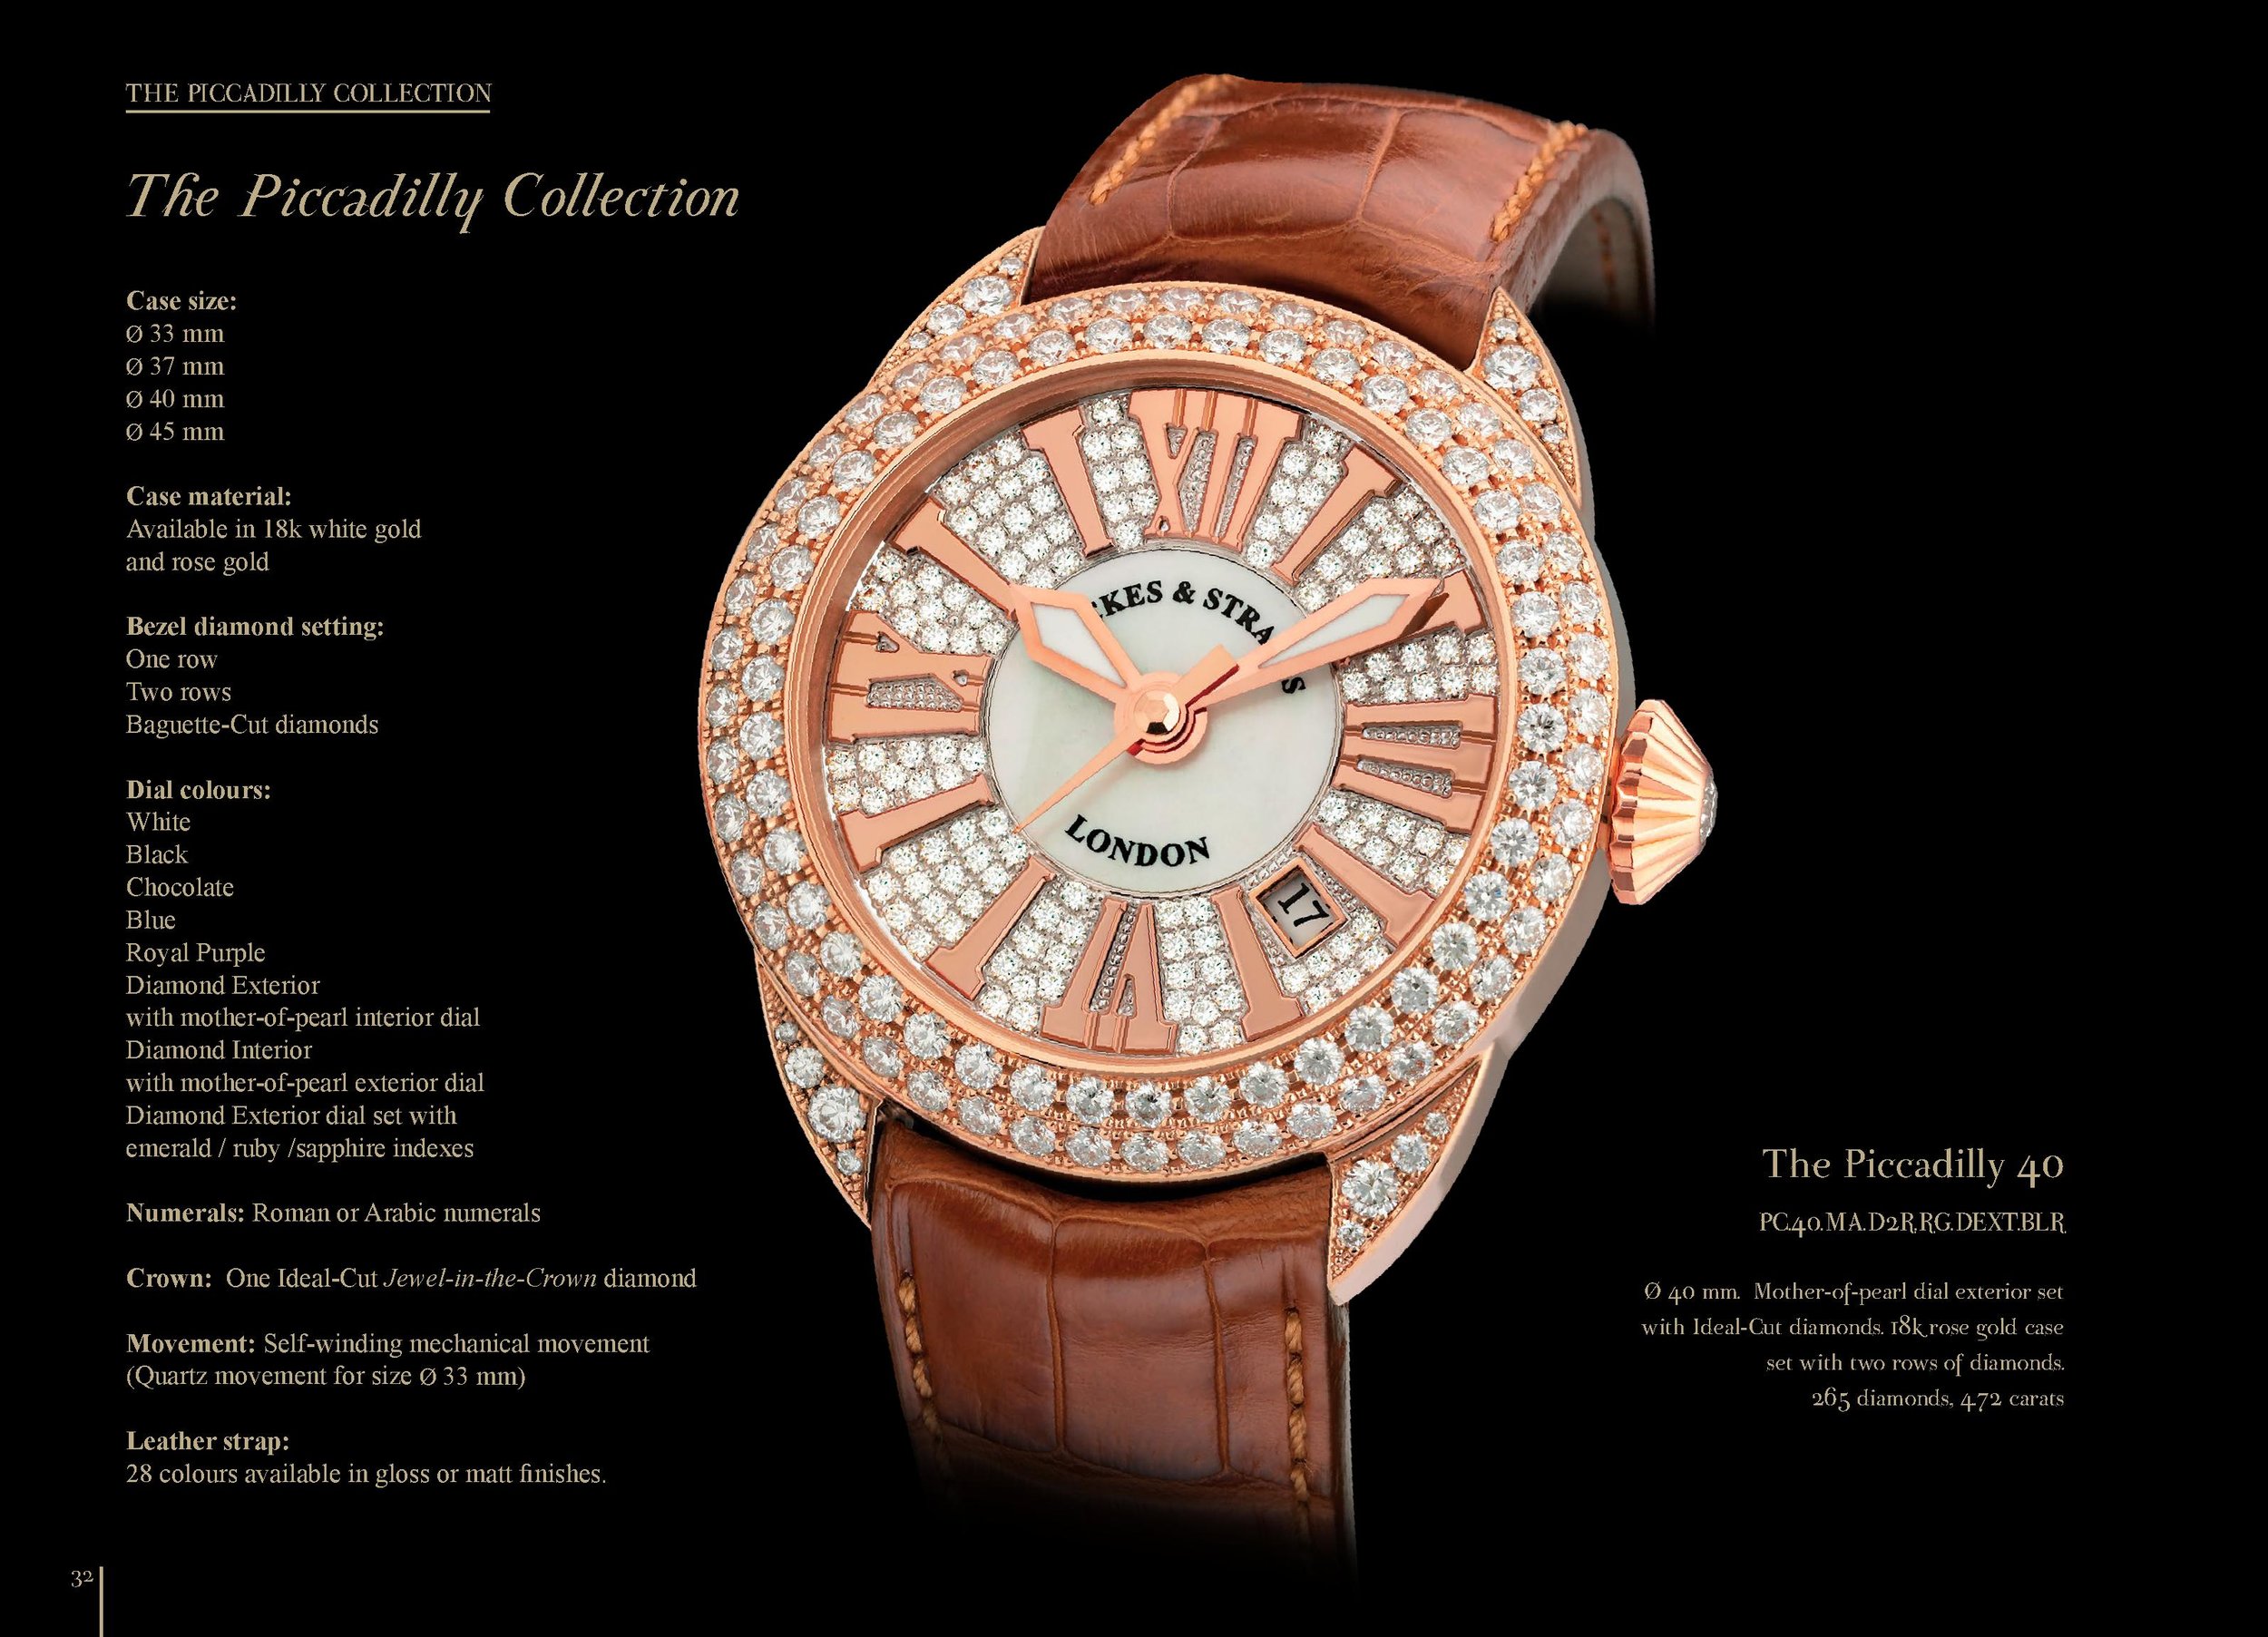 Piccadilly 40 watch